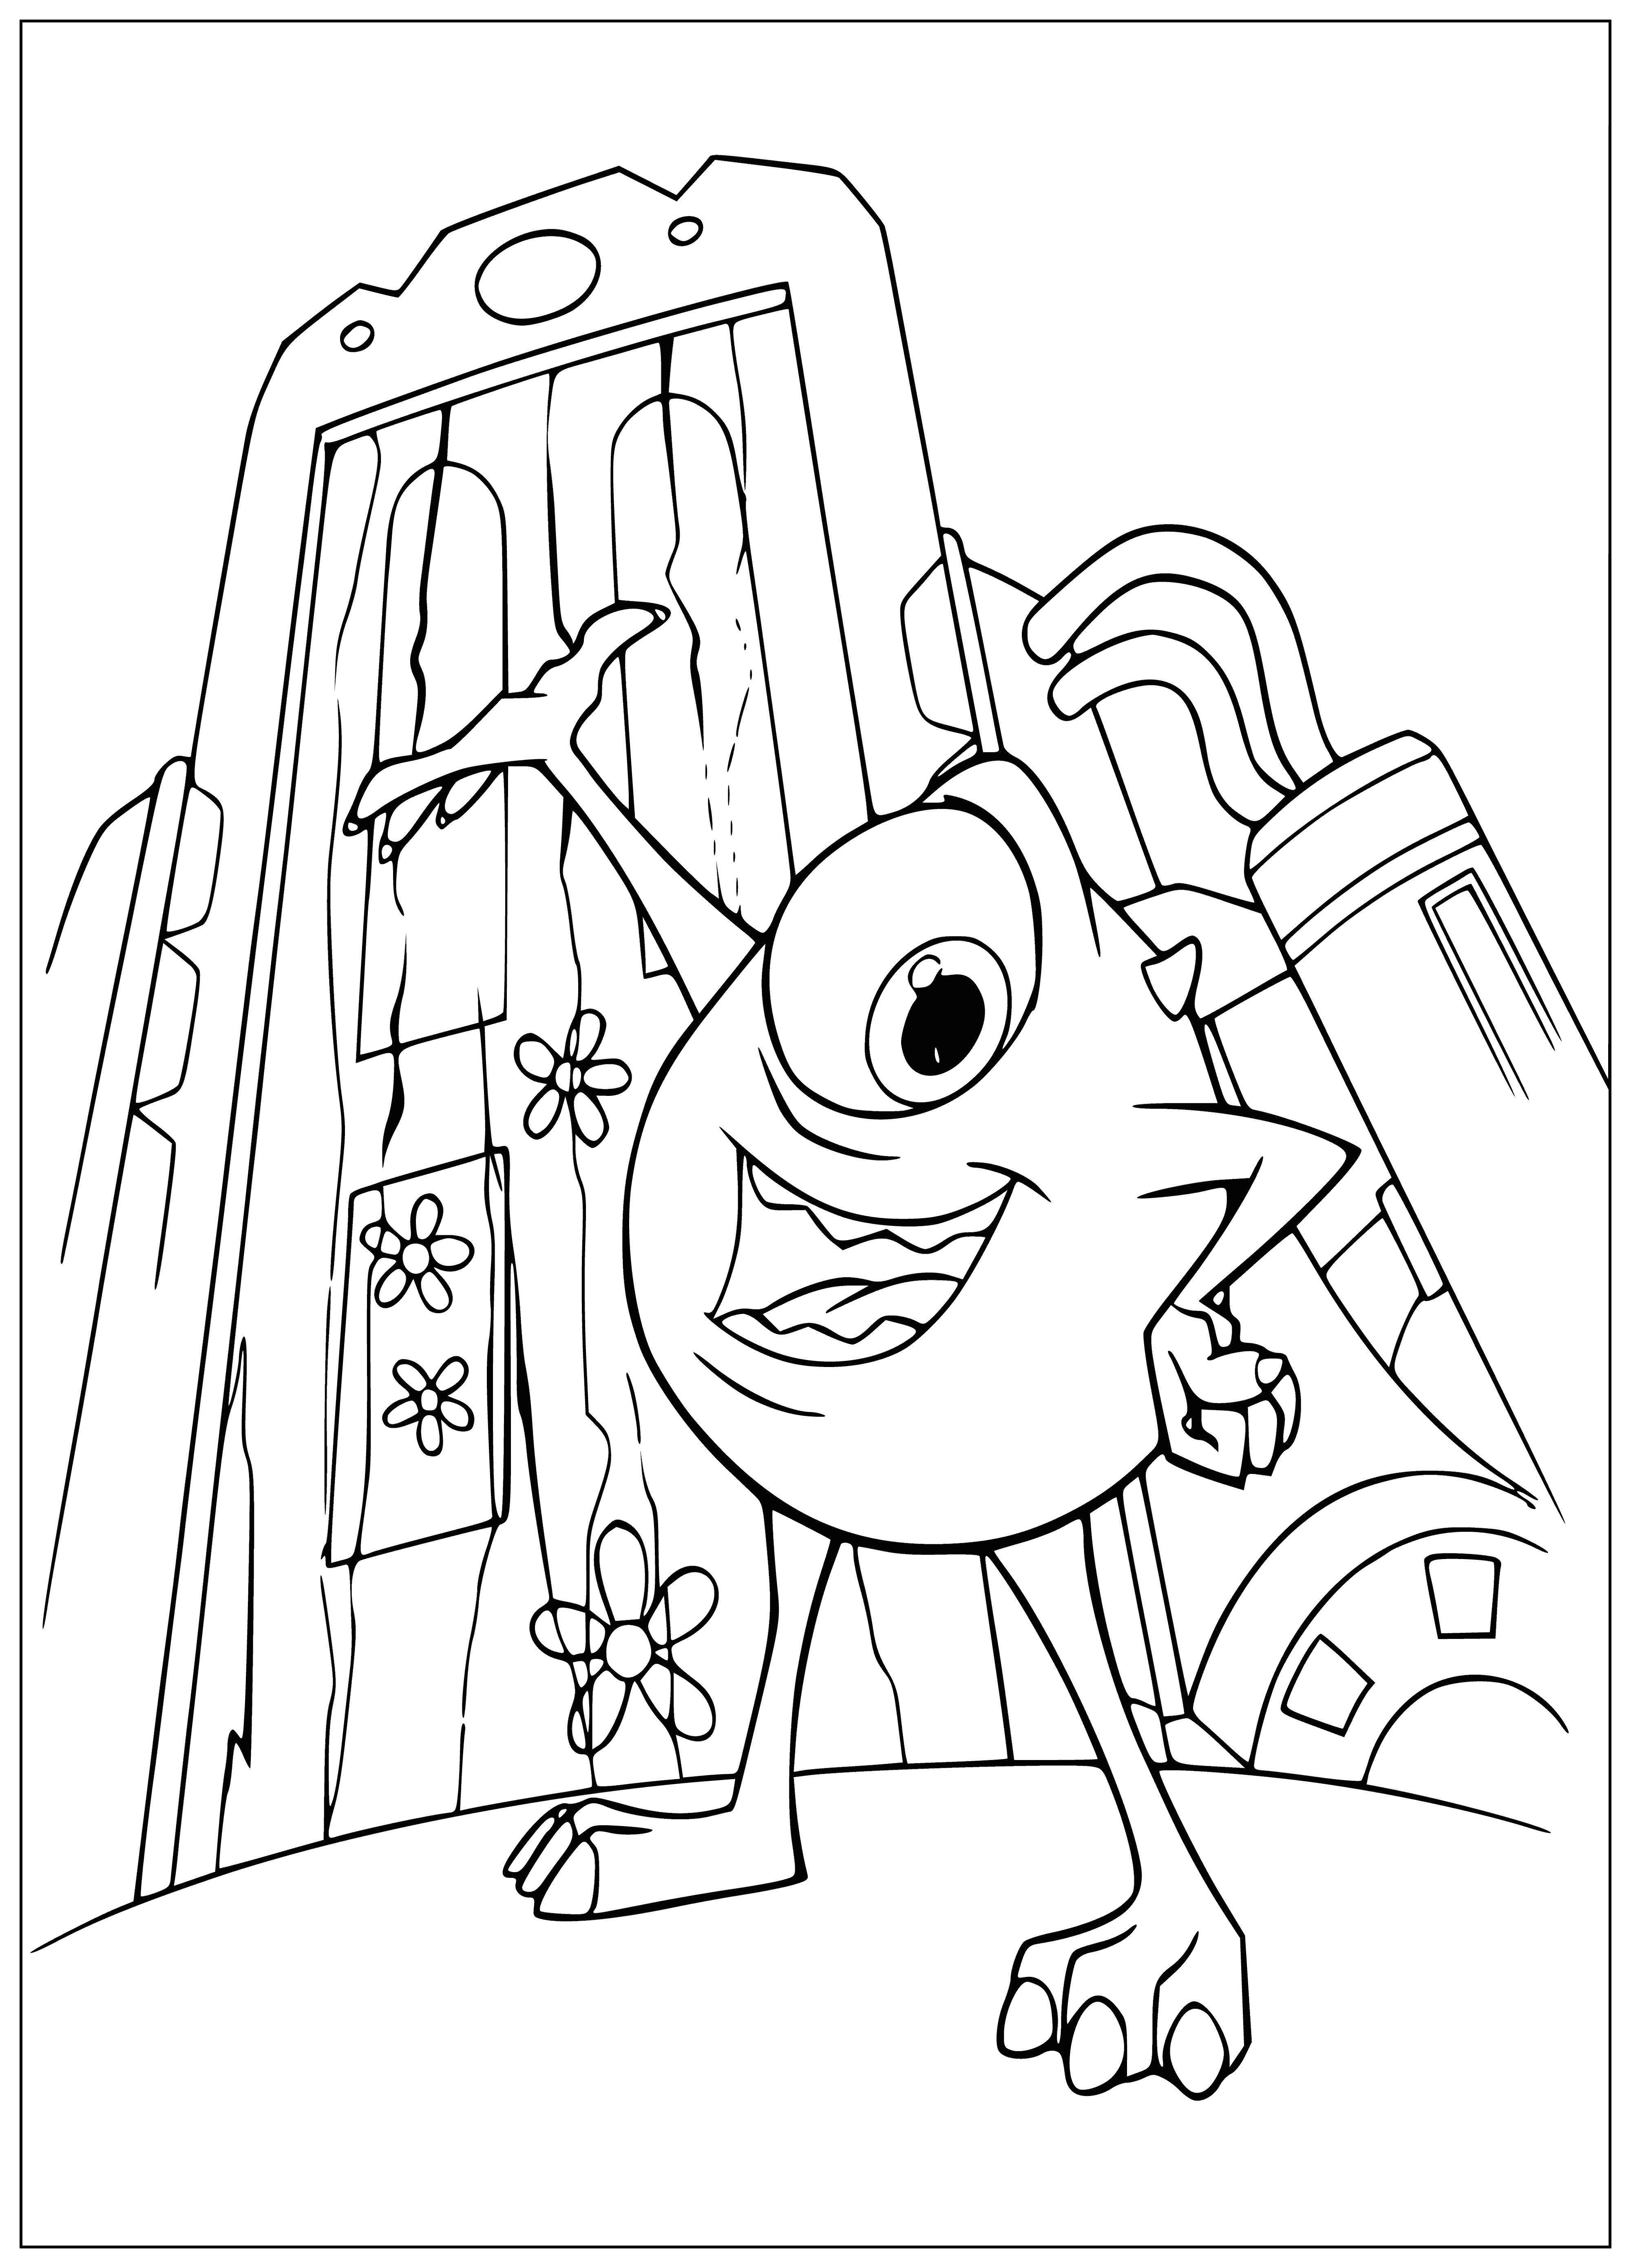 Mike fixed the door coloring page